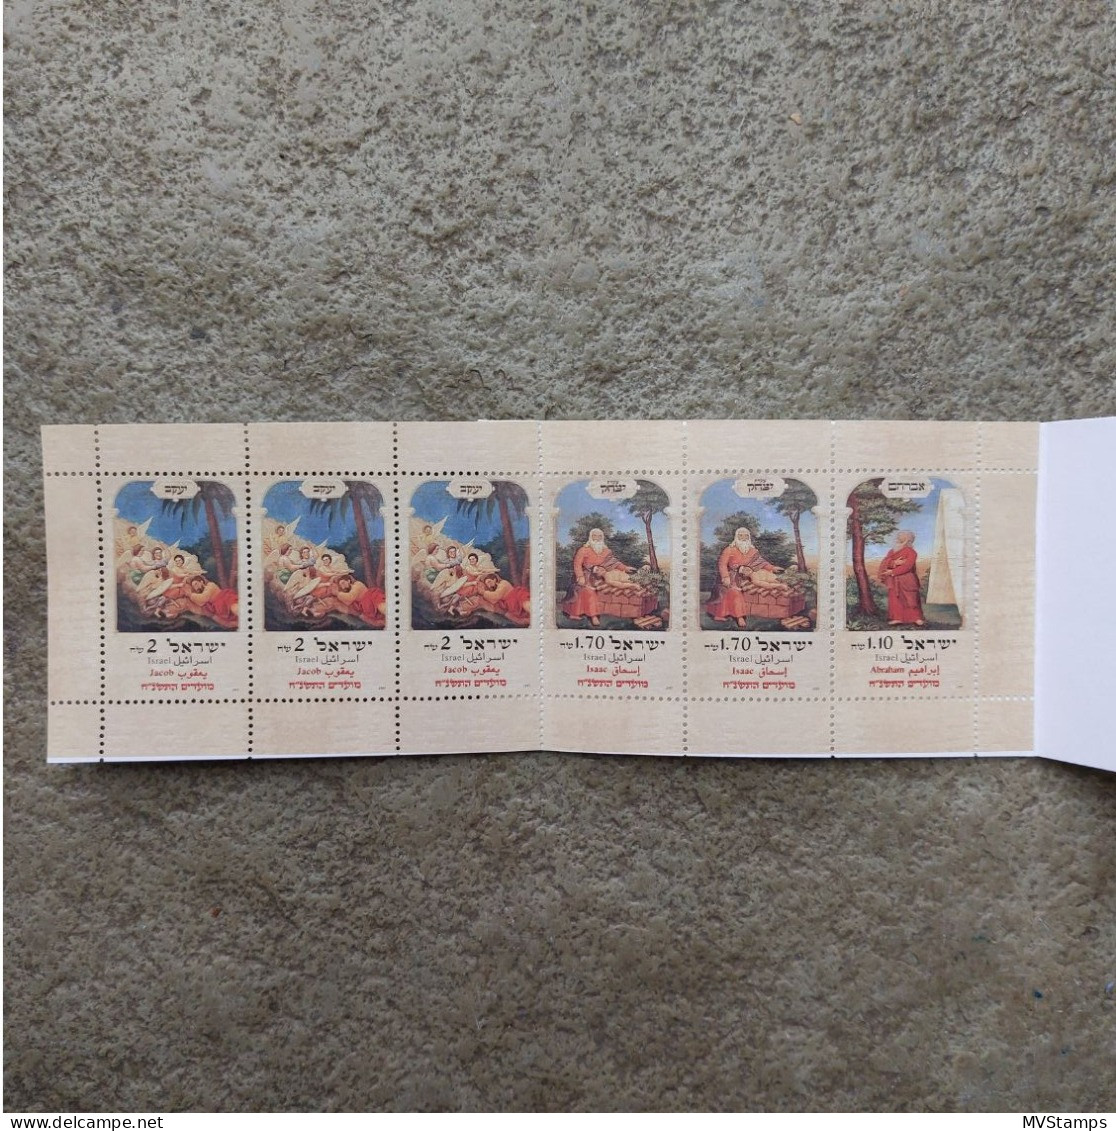 Israel 1997 Booklet Festival Stamps (Michel MH 31) Nice MNH - Carnets